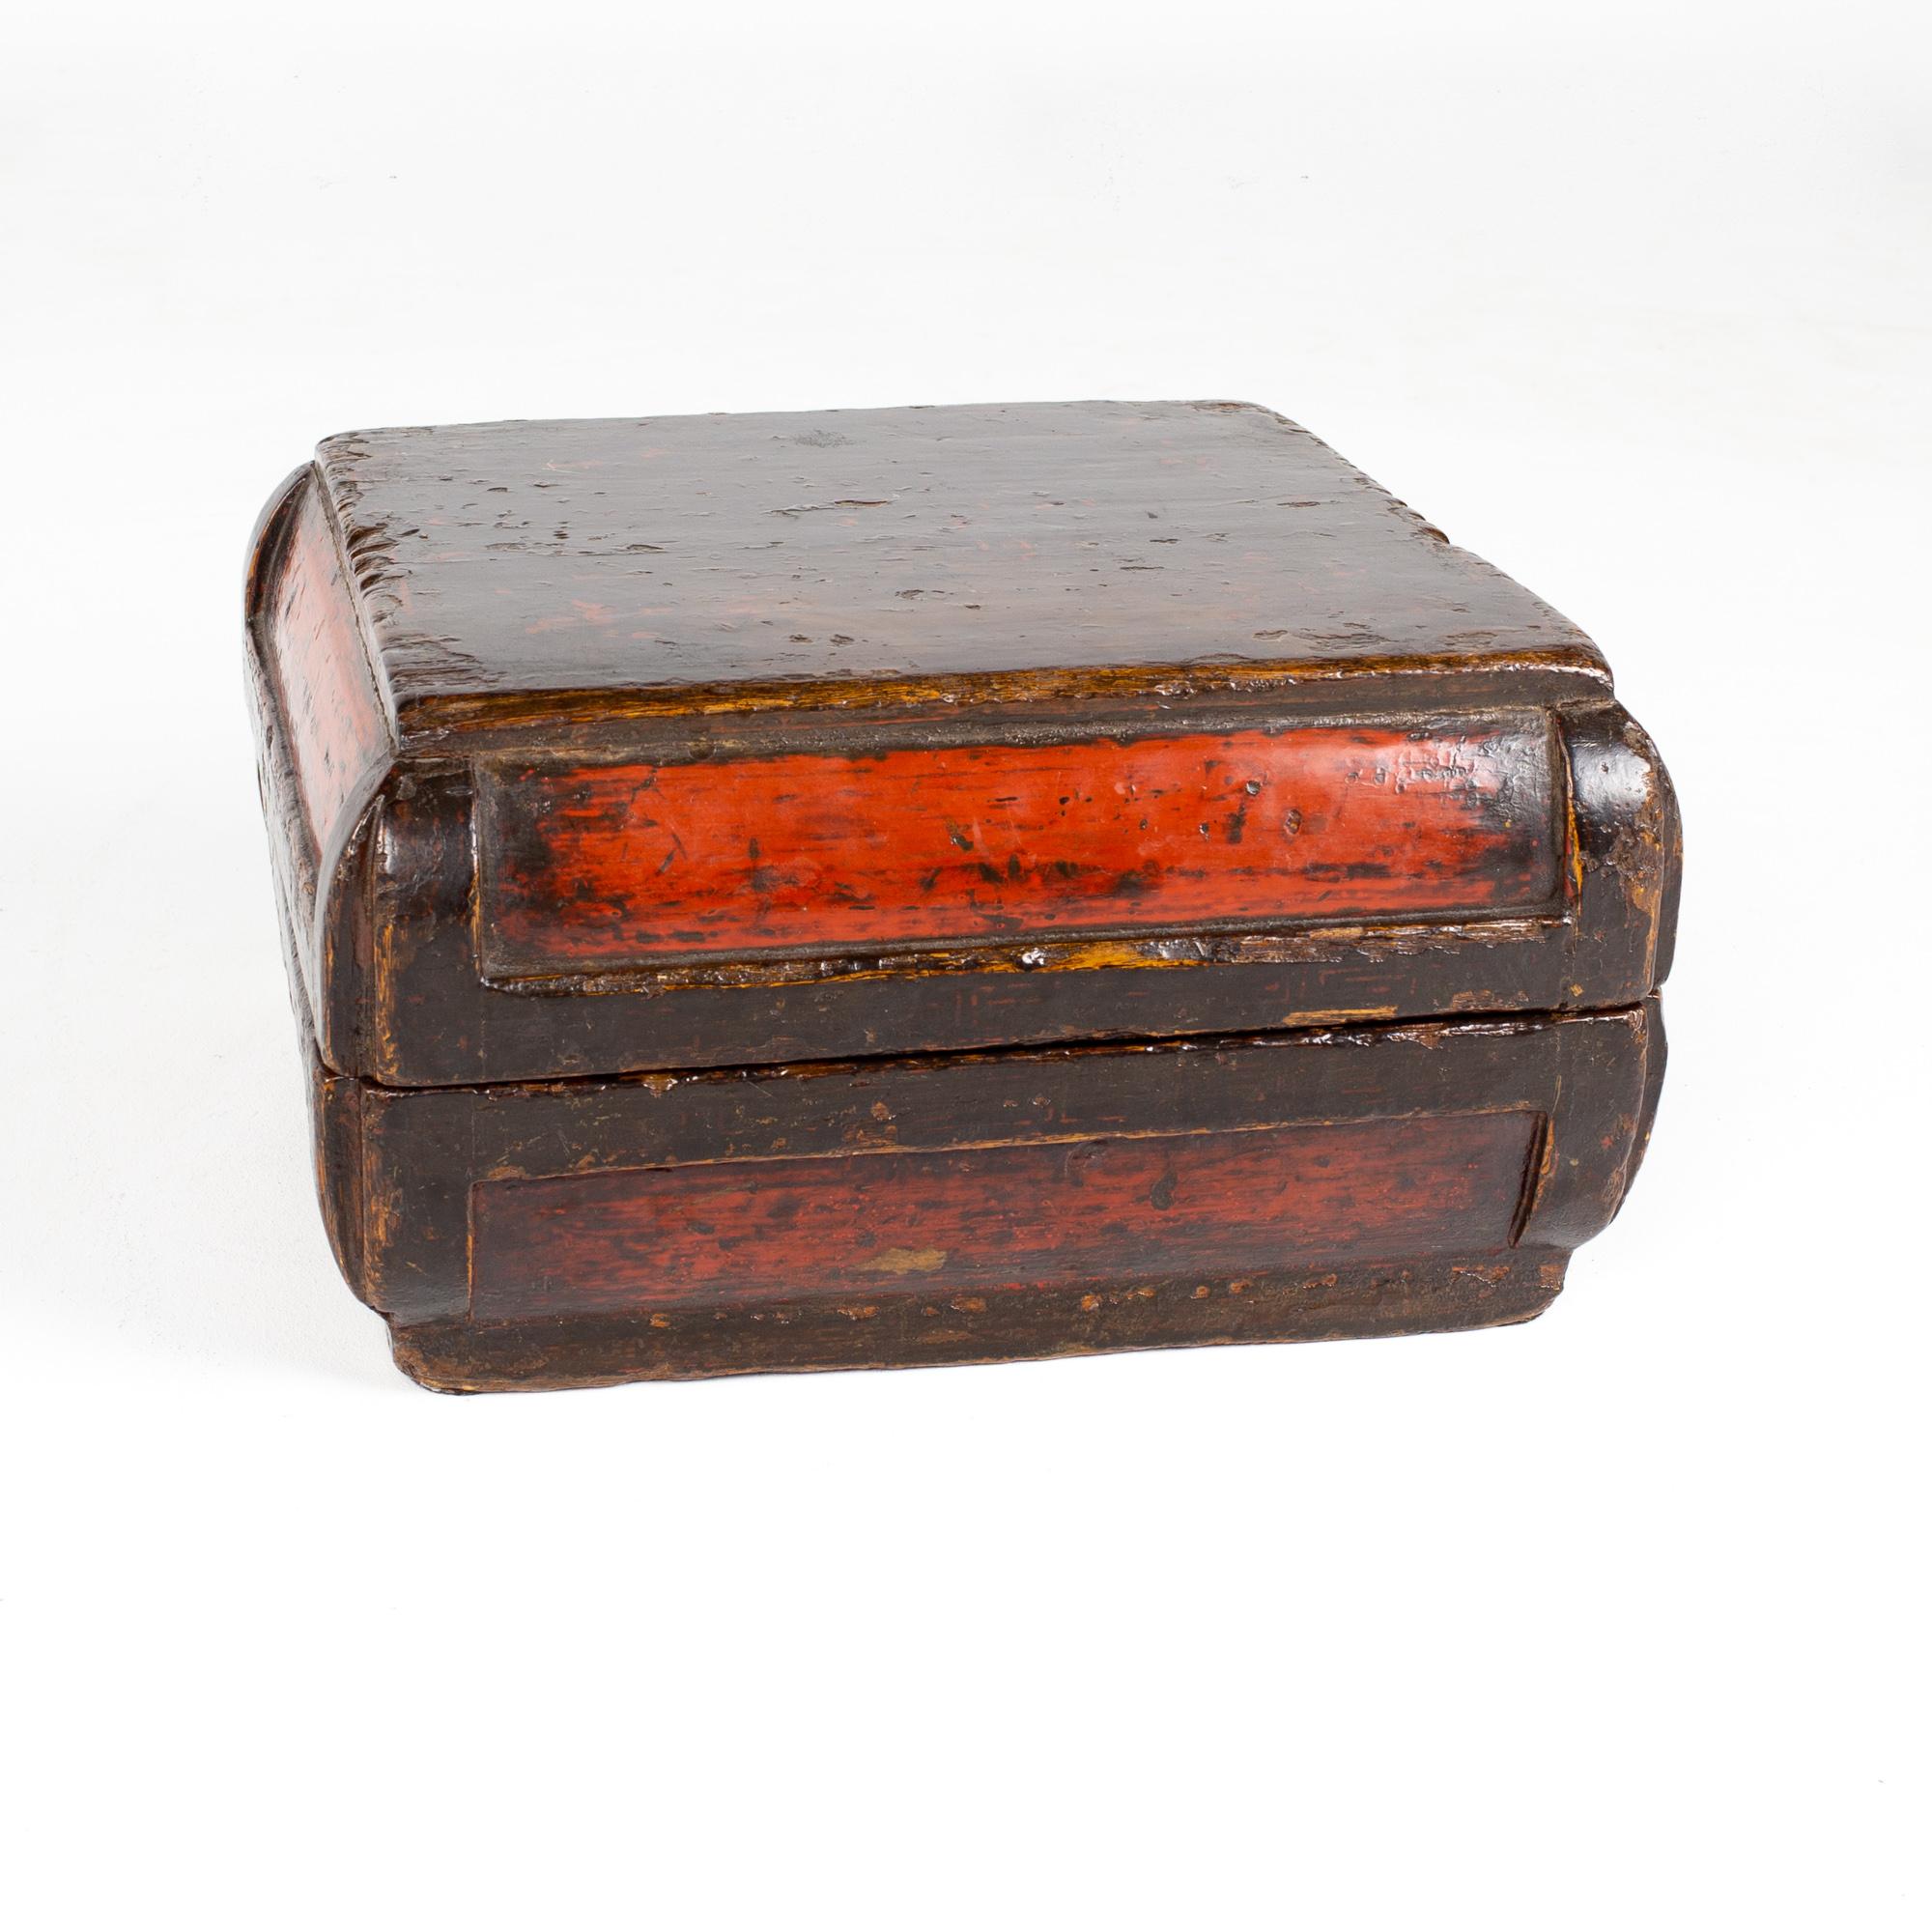 Antique Chinese red lacquer box

This box measures: 14.5 wide x 14.5 deep x 8 inches high

About Photos: We take our photos in a controlled lighting studio to show as much detail as possible. We do not photoshop out blemishes.

Condition: At